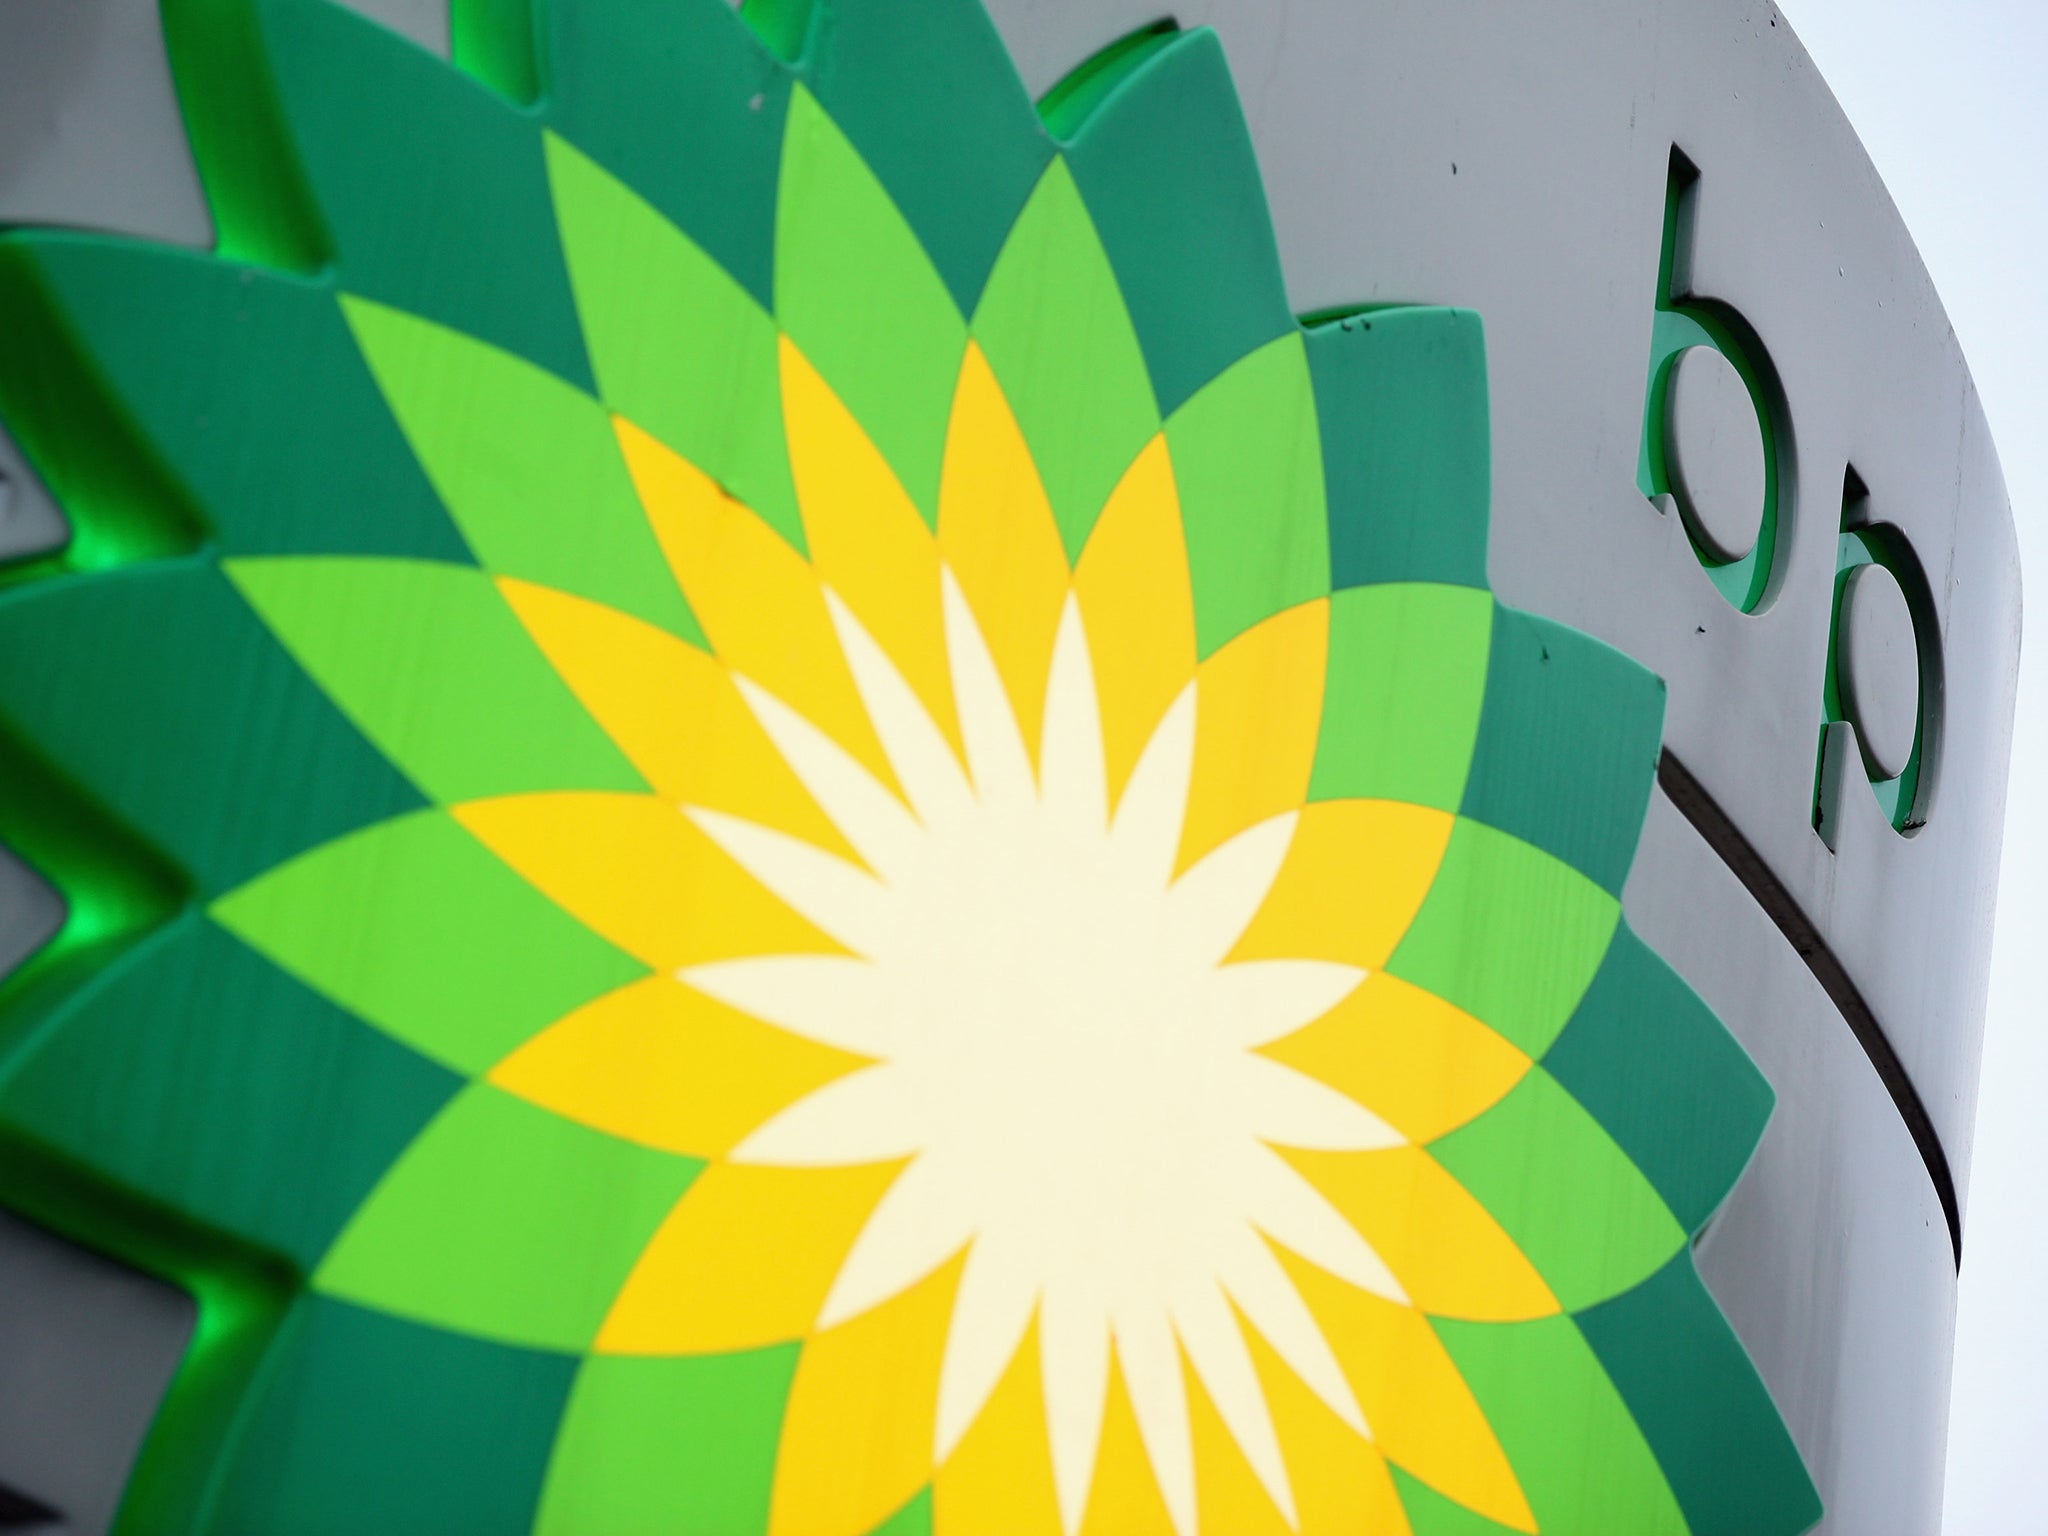 BP says it is responding to the tough market conditions